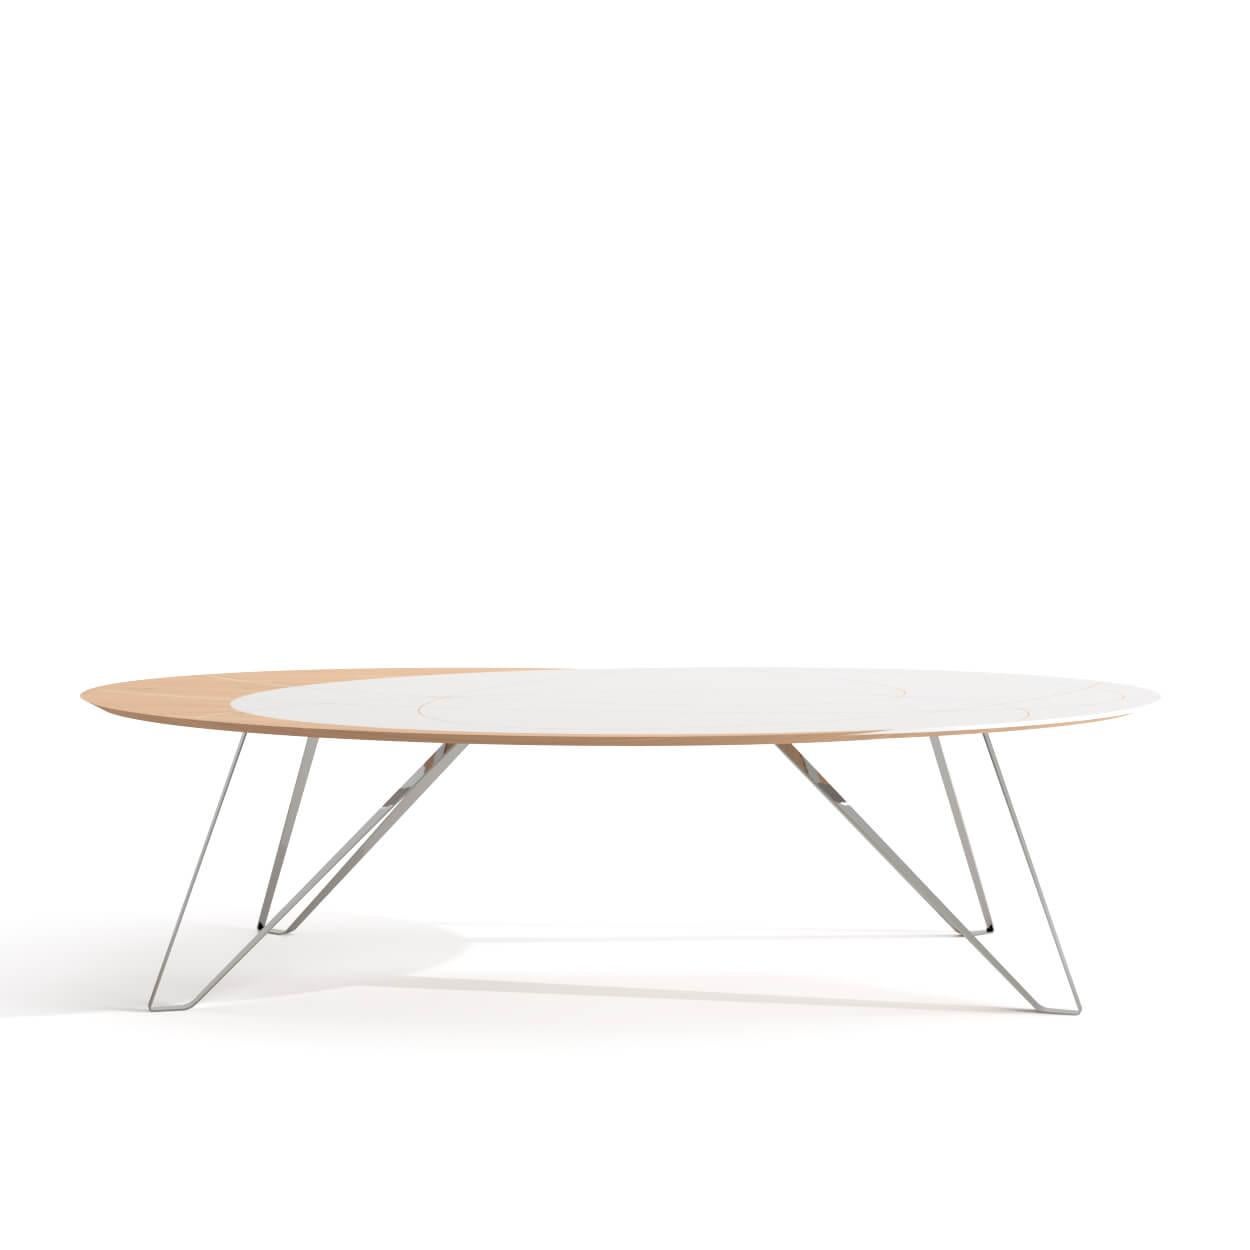 The Orbit Collection is perfect for relaxed home designs, full of light and personality. The dining table has an oval shape, with oak wood and white lacquered wood interconnected on its tabletop, making it the focal point of your room. The feet are